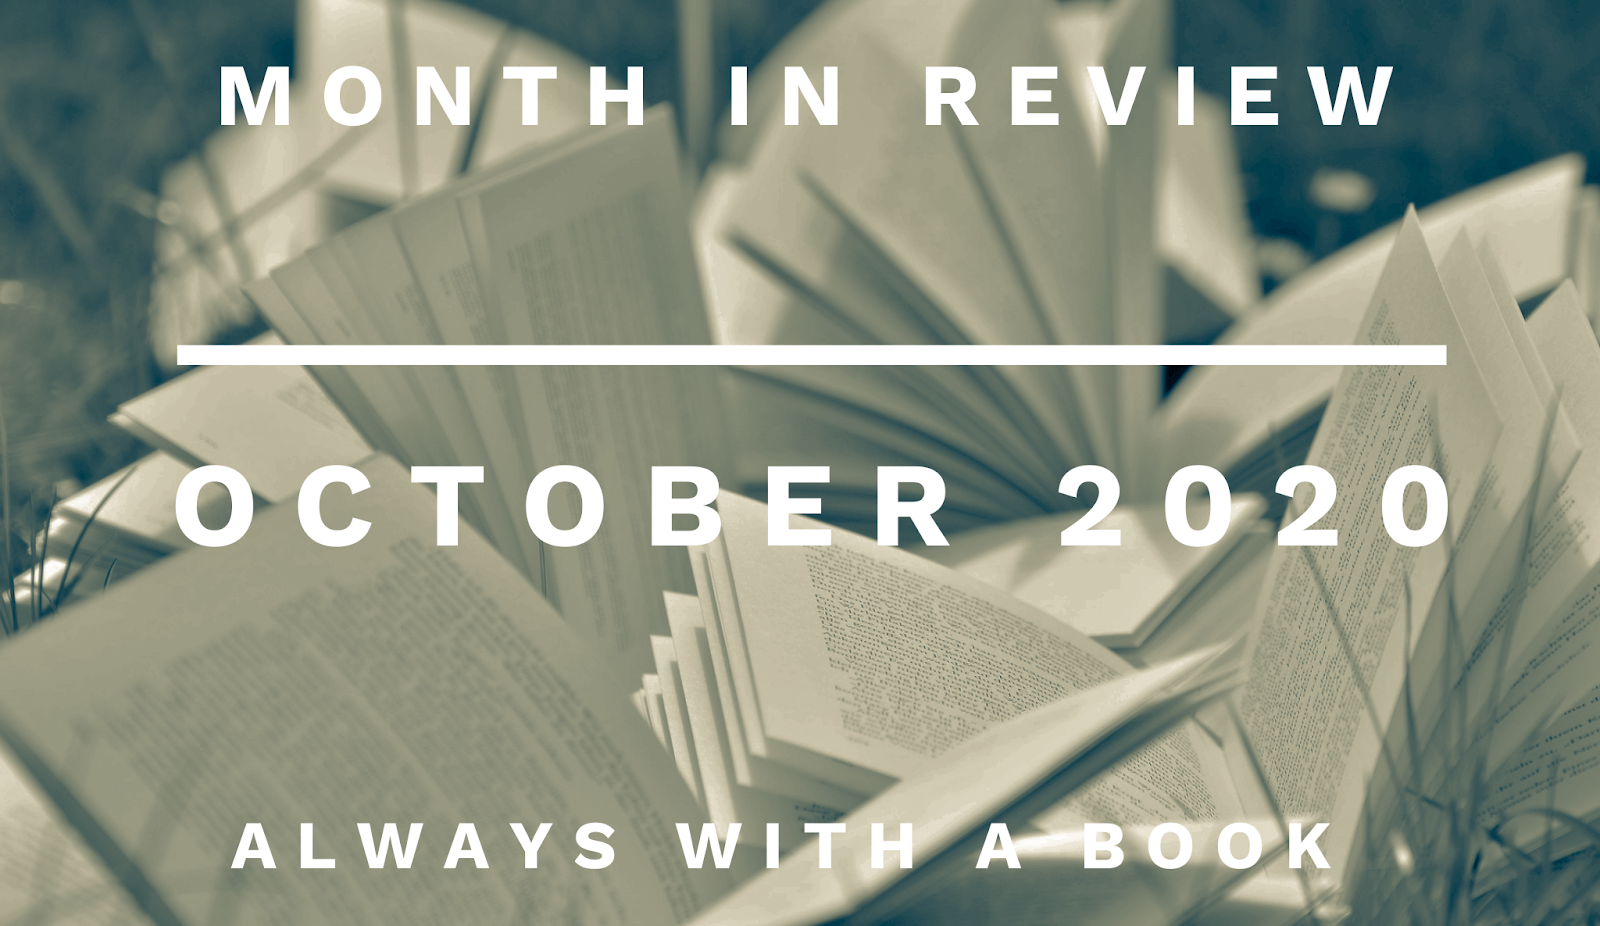 Month in Review: October 2020